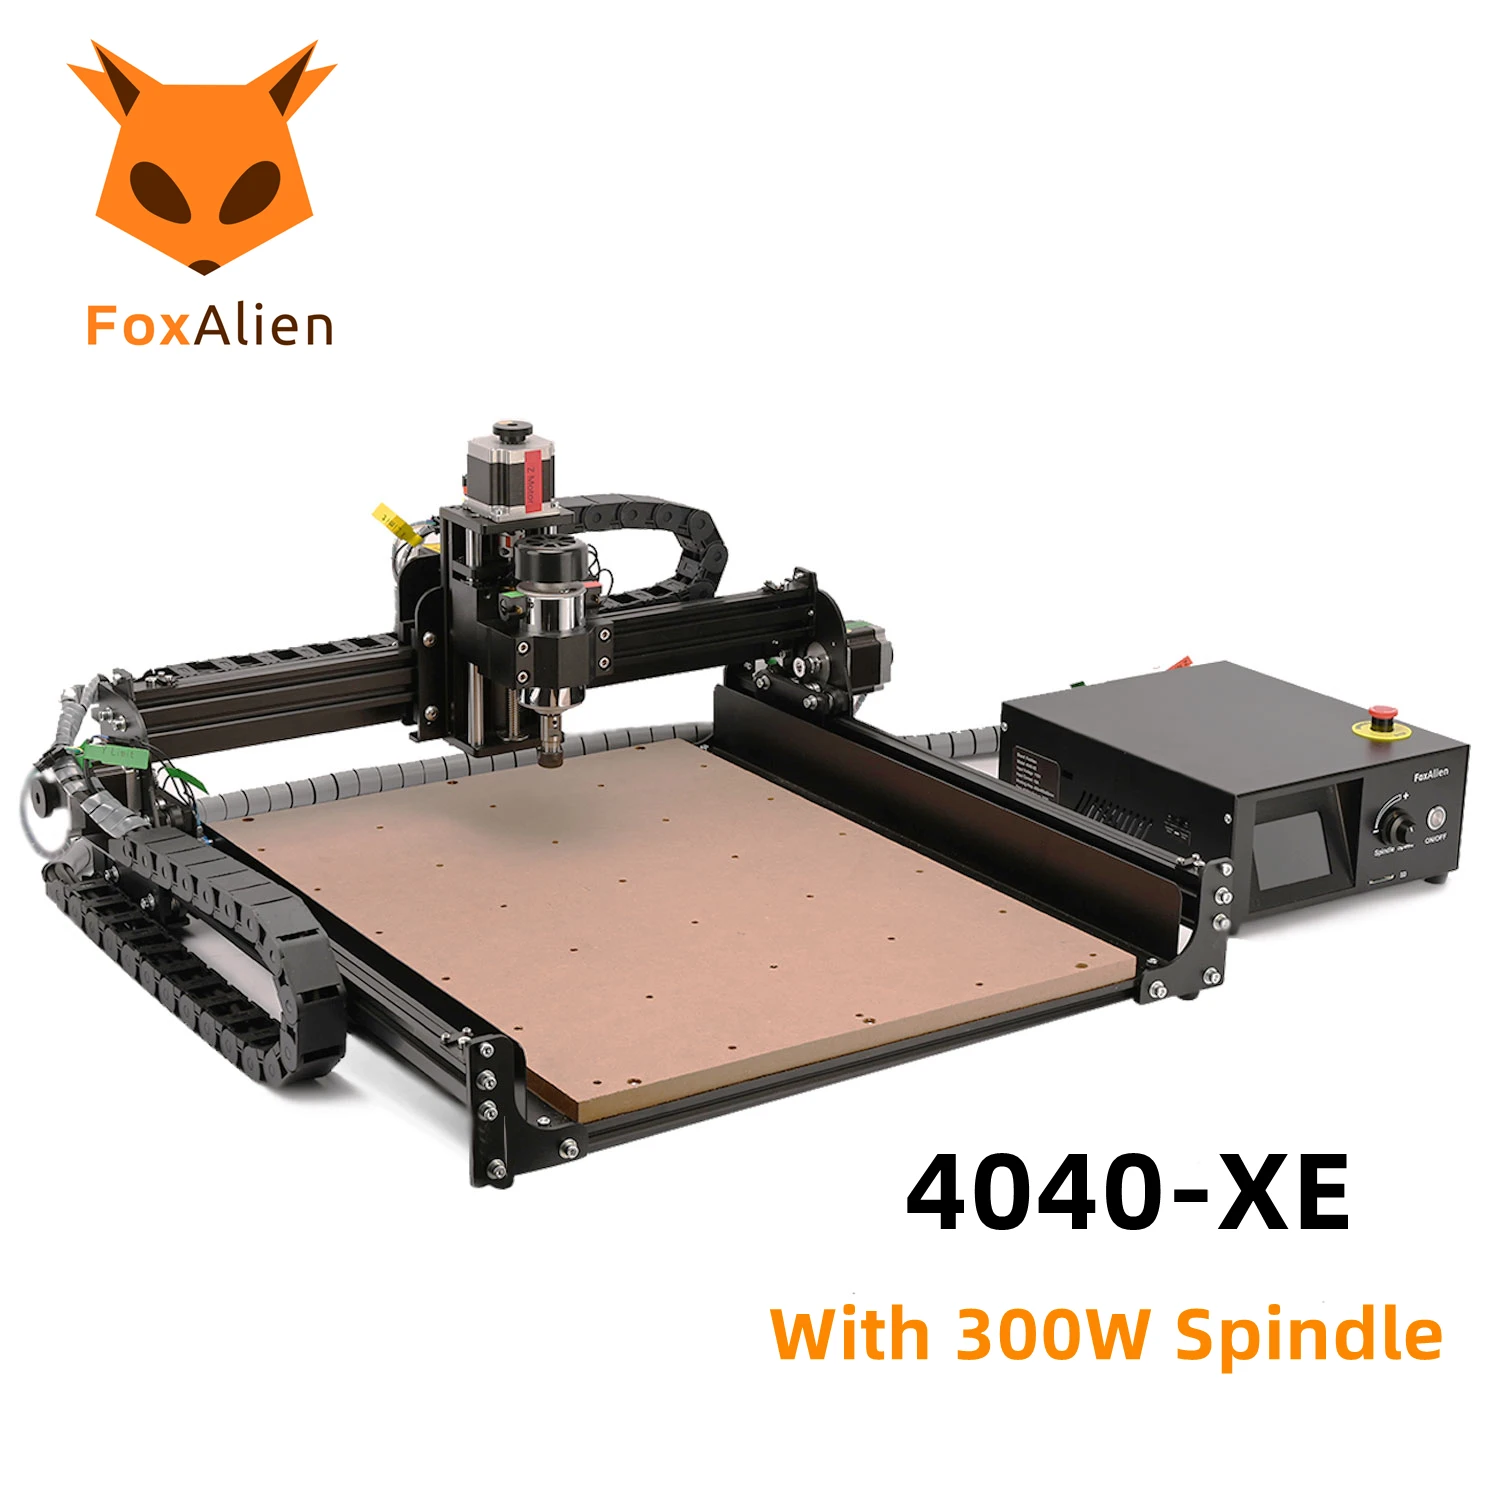 CNC Router Machine 300w Spindle 3-Axis Support 20w 40w Laser Engraver Wood Router Engraving Cutting Machine FoxAlien 4040-XE